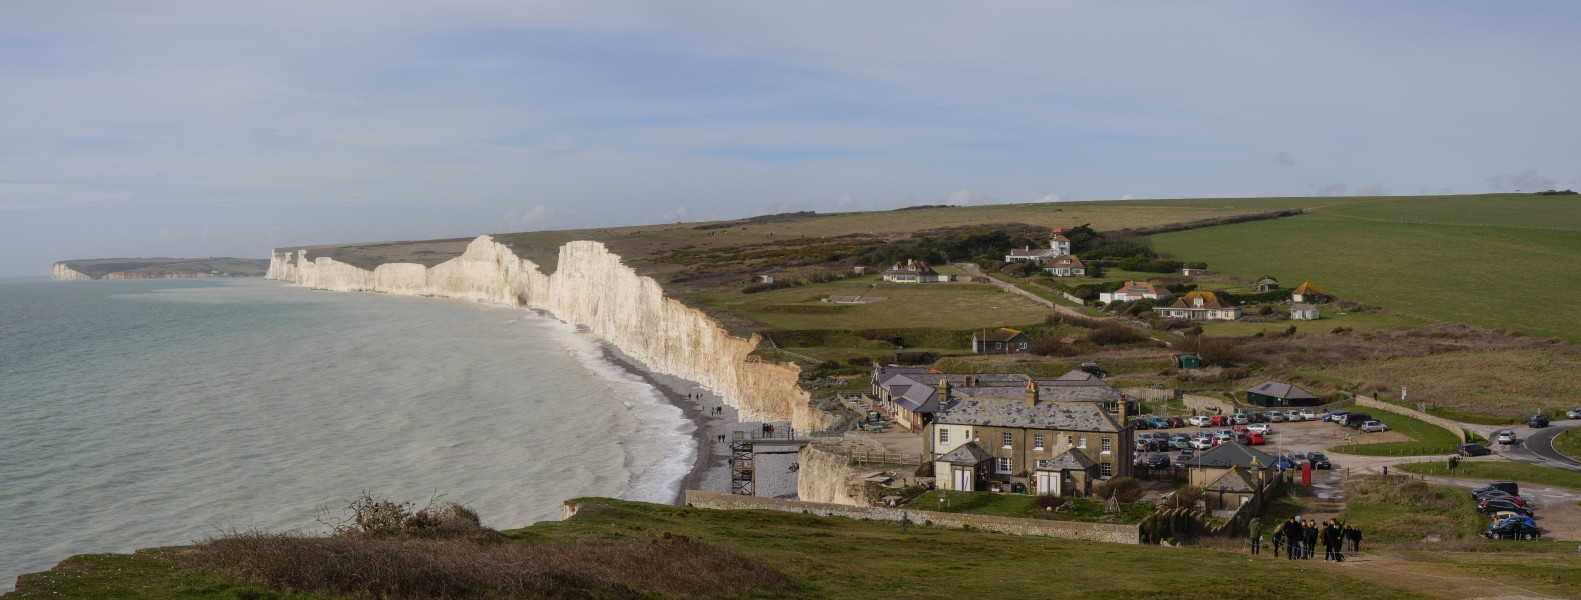 Seven Sisters March 2017 02